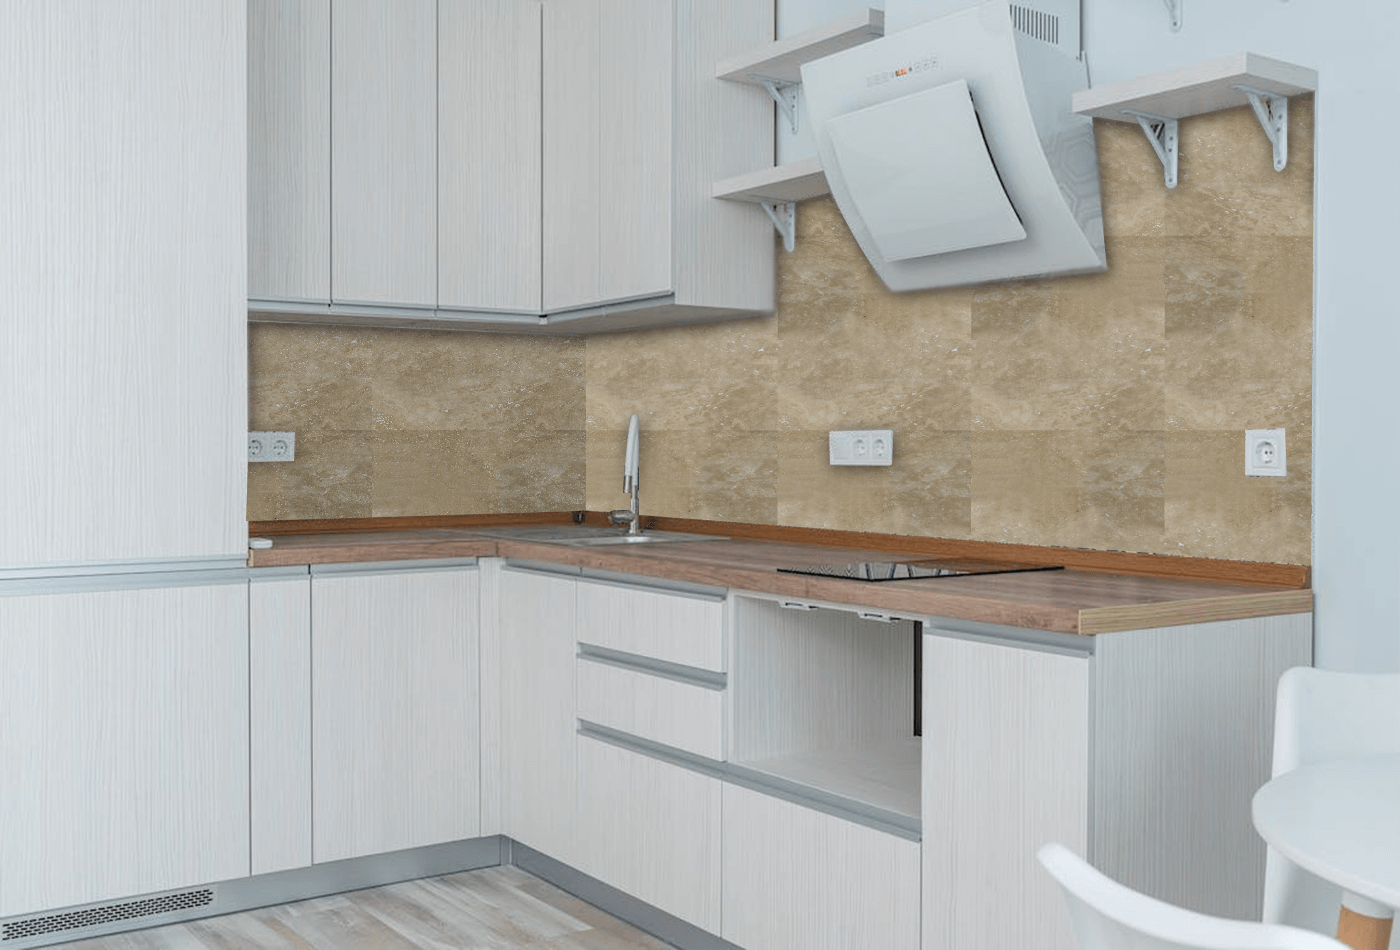 Lydia kremna Travertine Tile Backsplash is a Rustic Yet Low-Maintenance Complement to any Kitchen